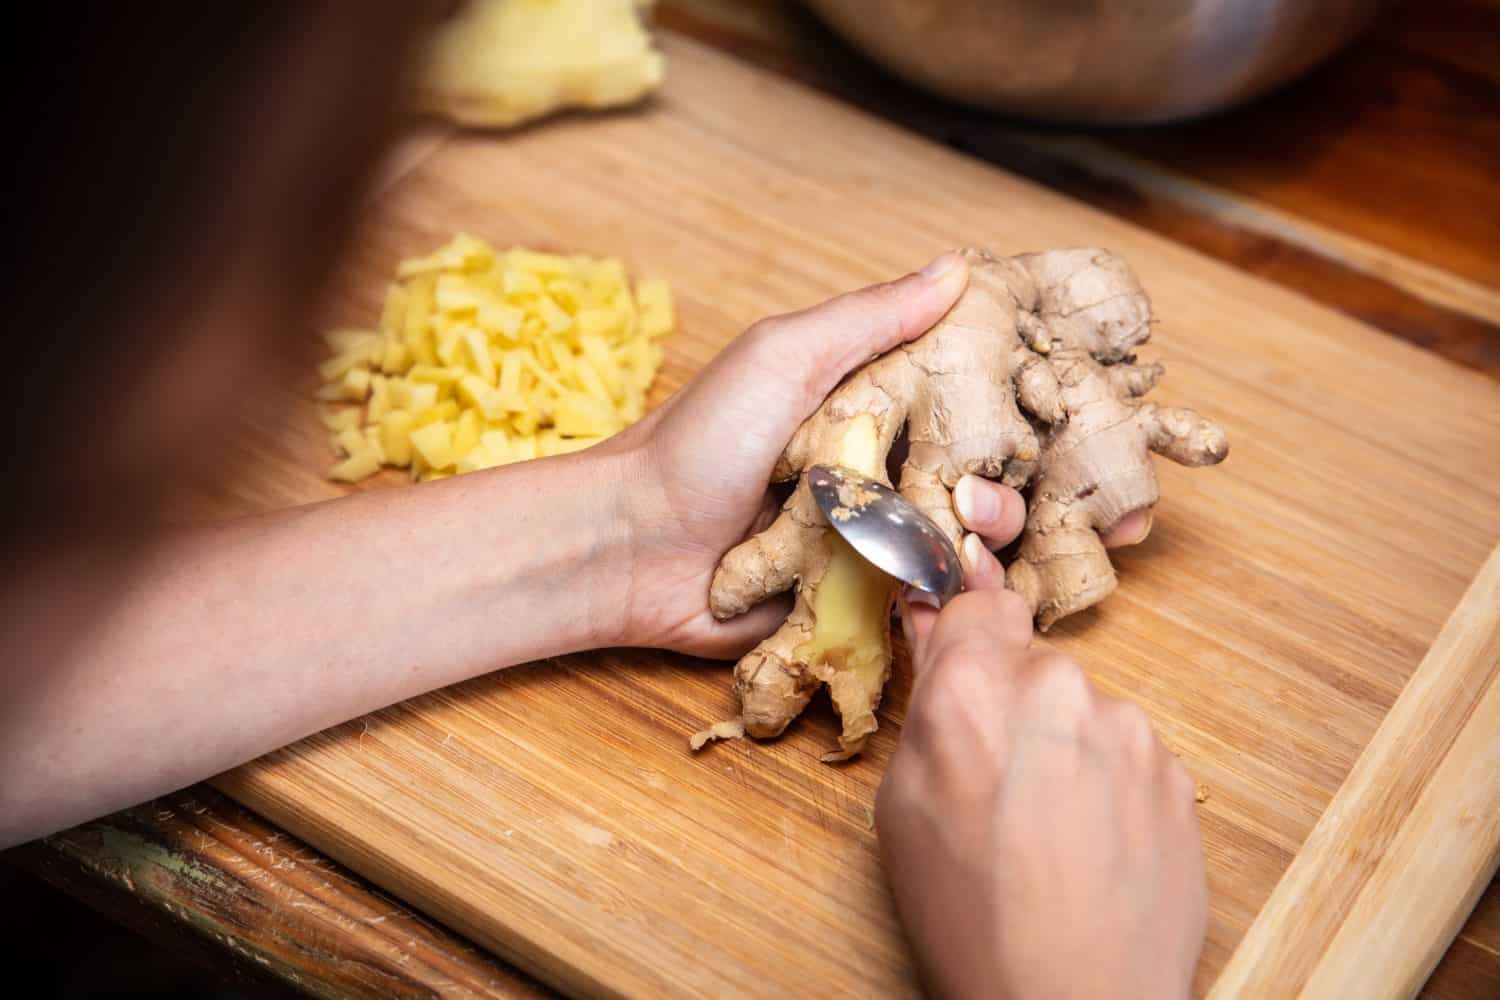 Peeling or peel off ginger with a spoon, preparation in the kitchen, female hands